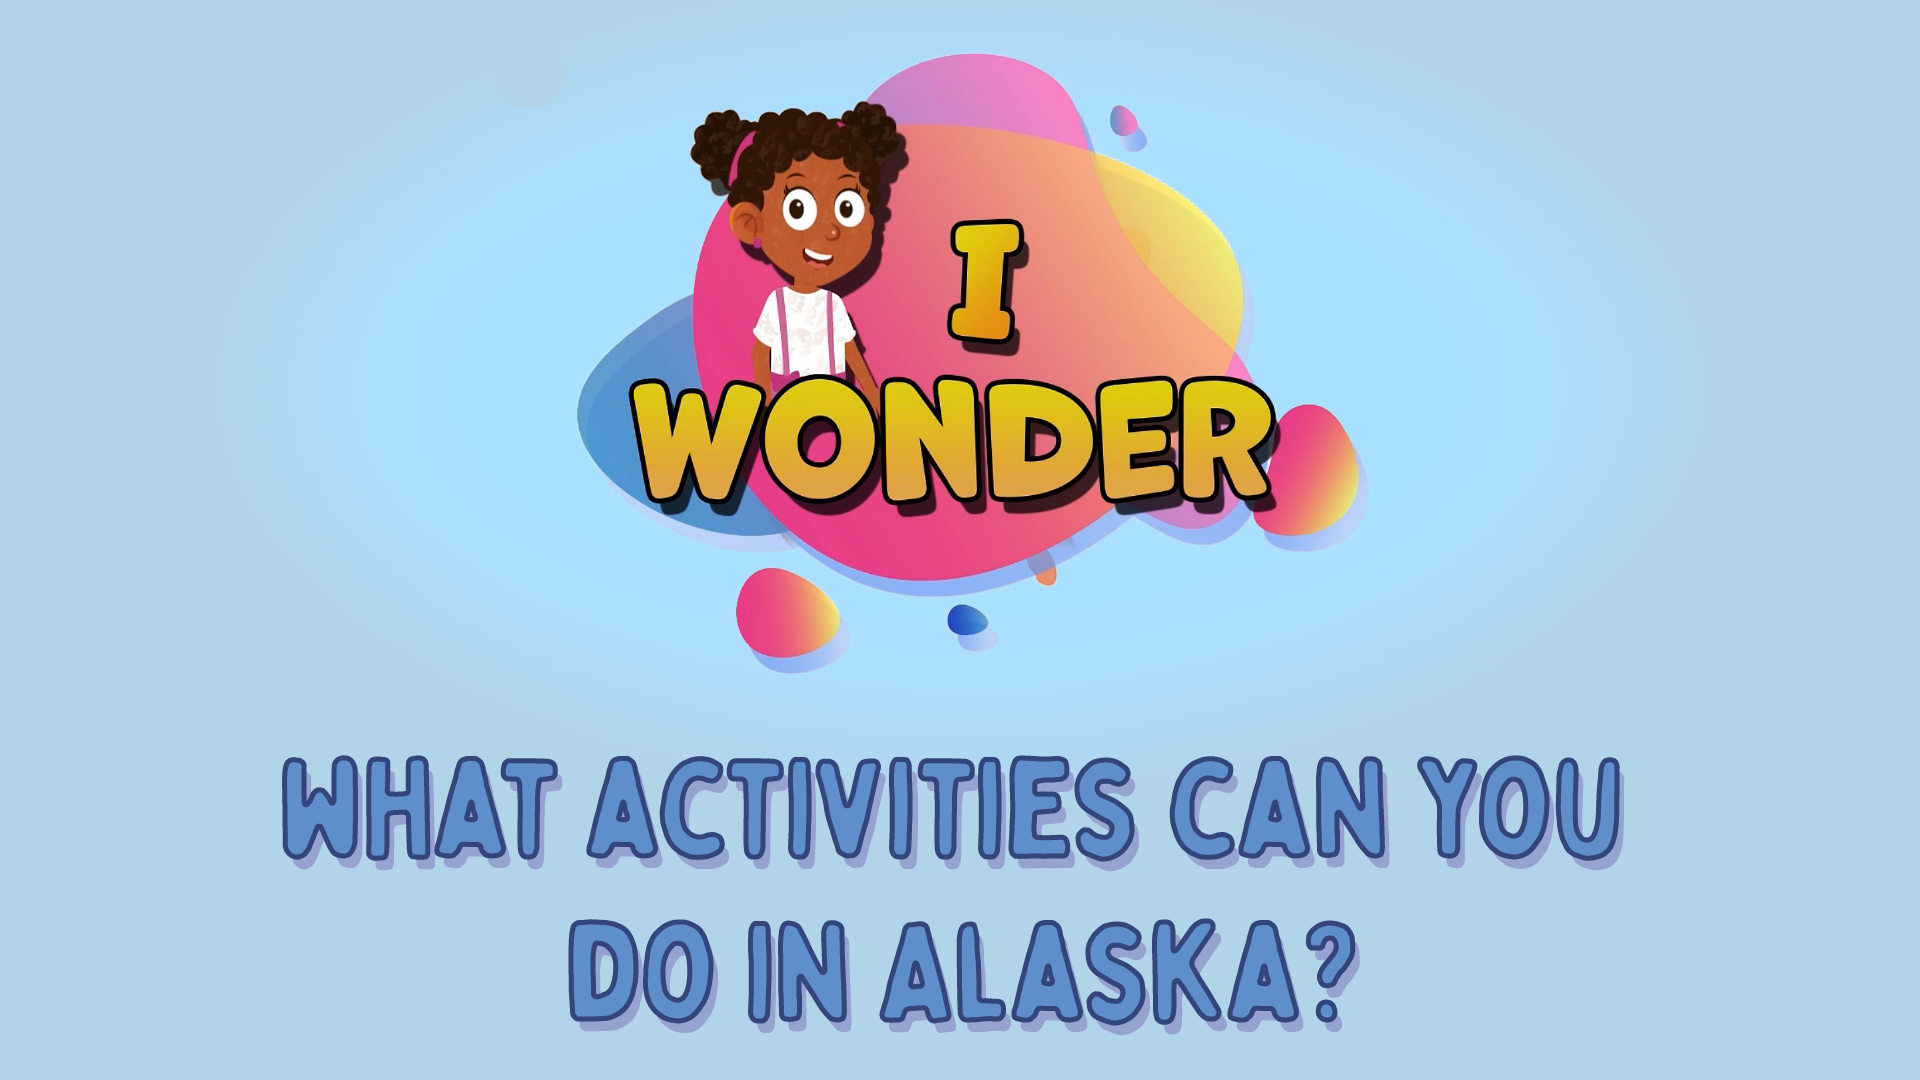 What Activities Can You Do In Alaska?